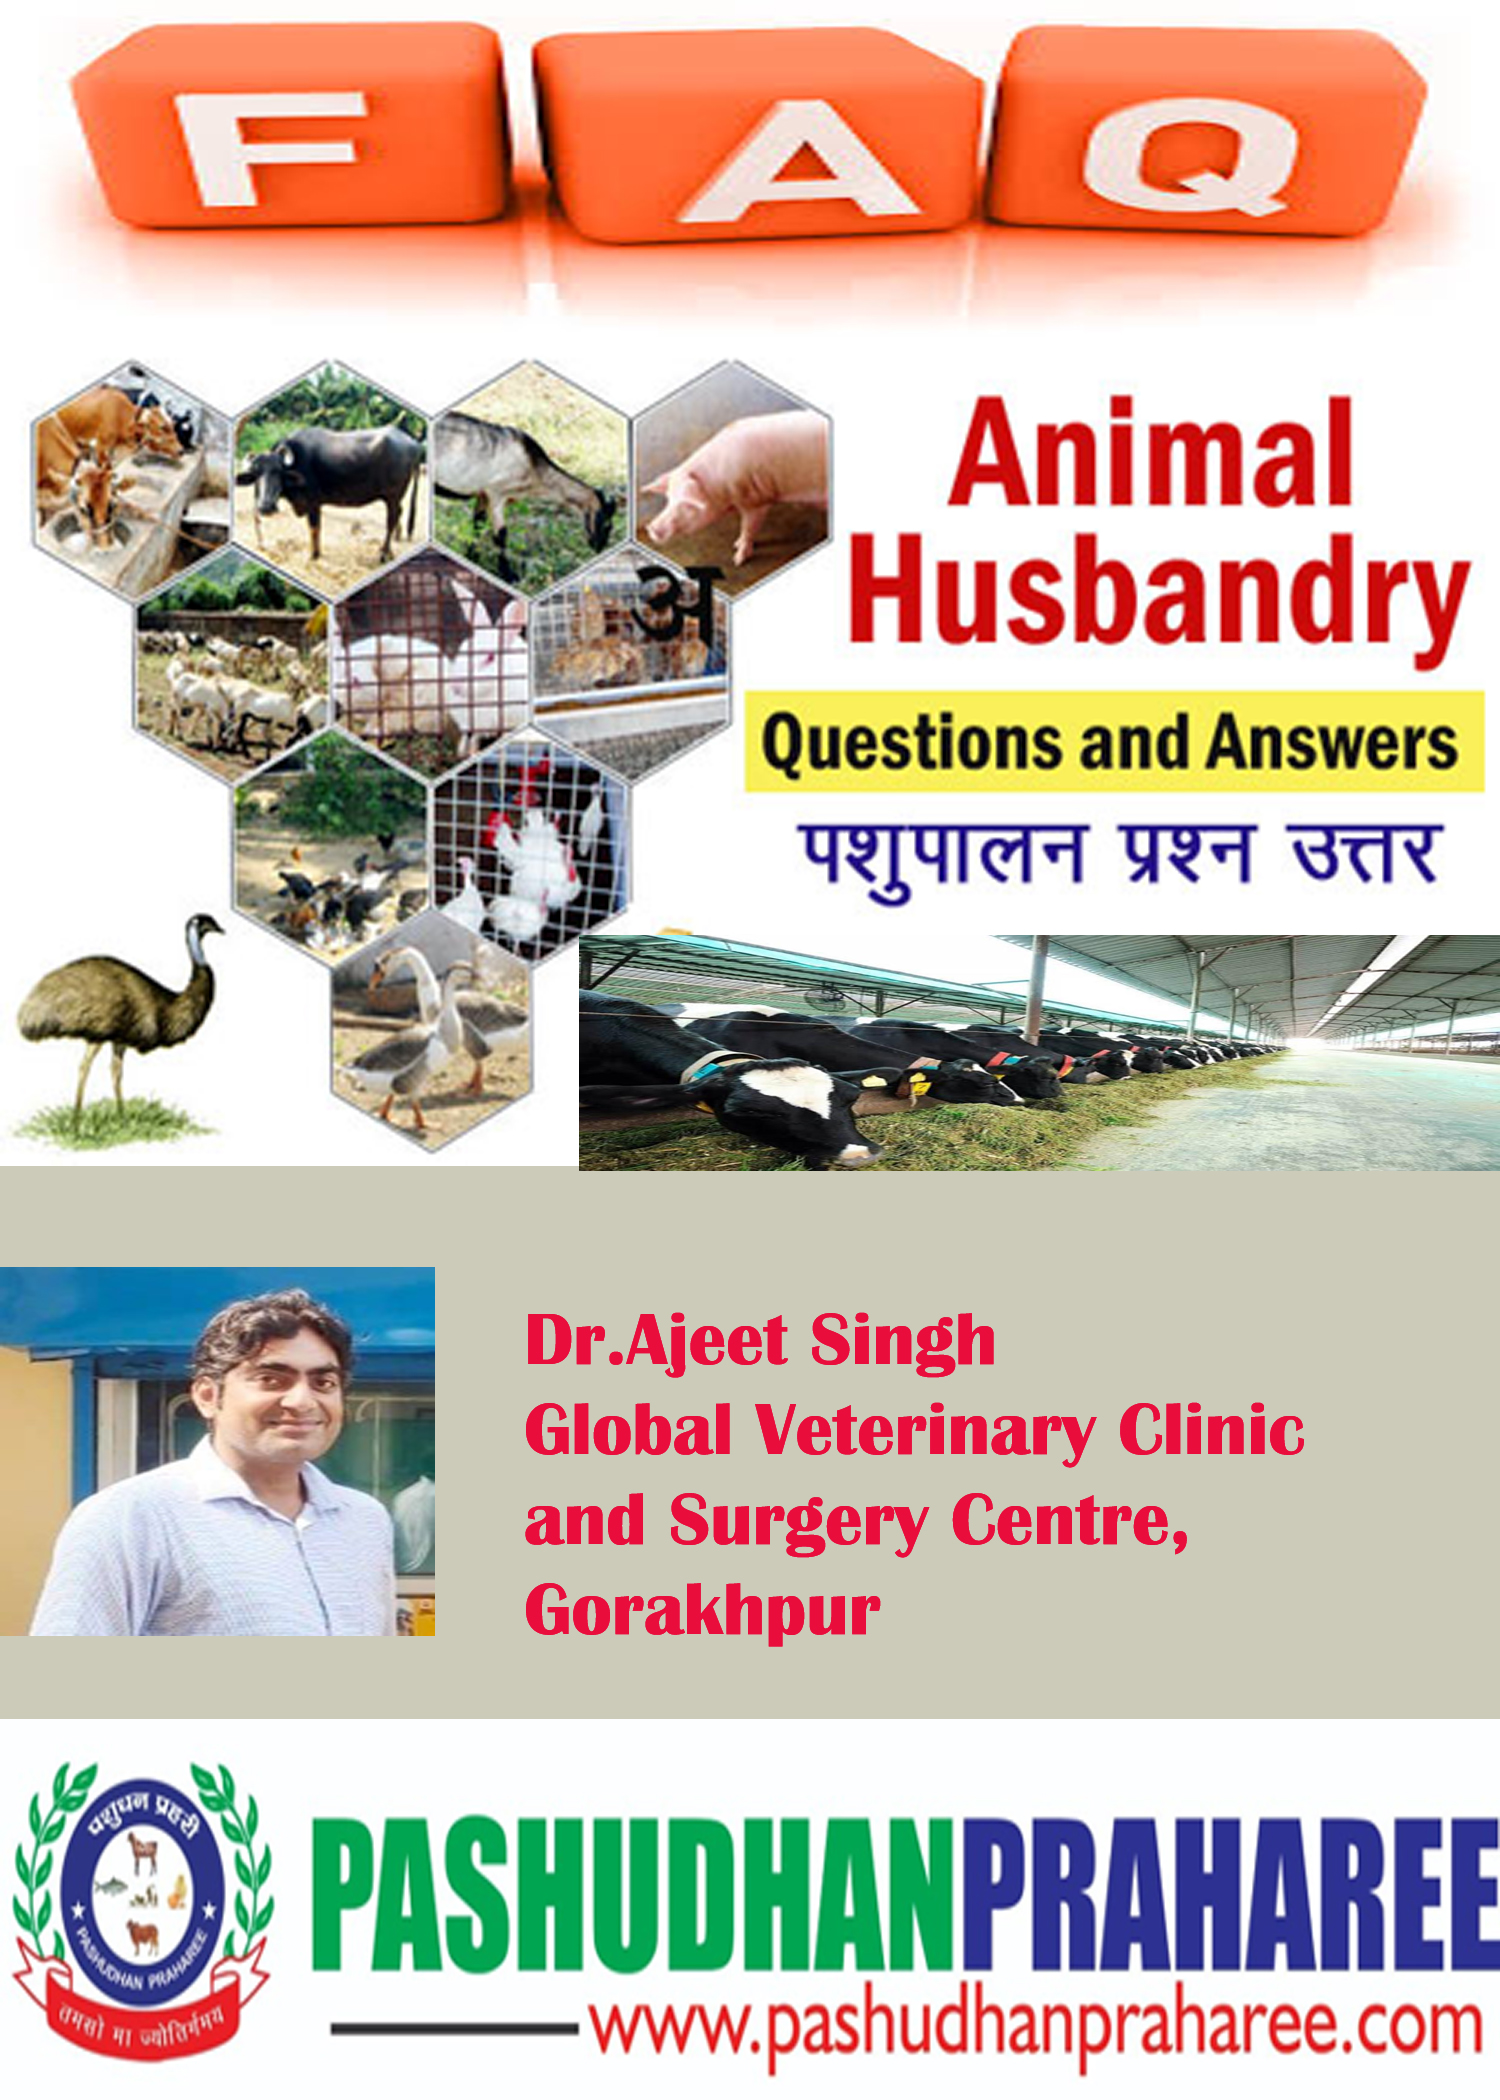 FREQUENTLY ASKED QUESTIONS IN ANIMAL HUSBANDRY PRACTICES FOR LIVESTOCK  FARMERS – Pashudhan praharee